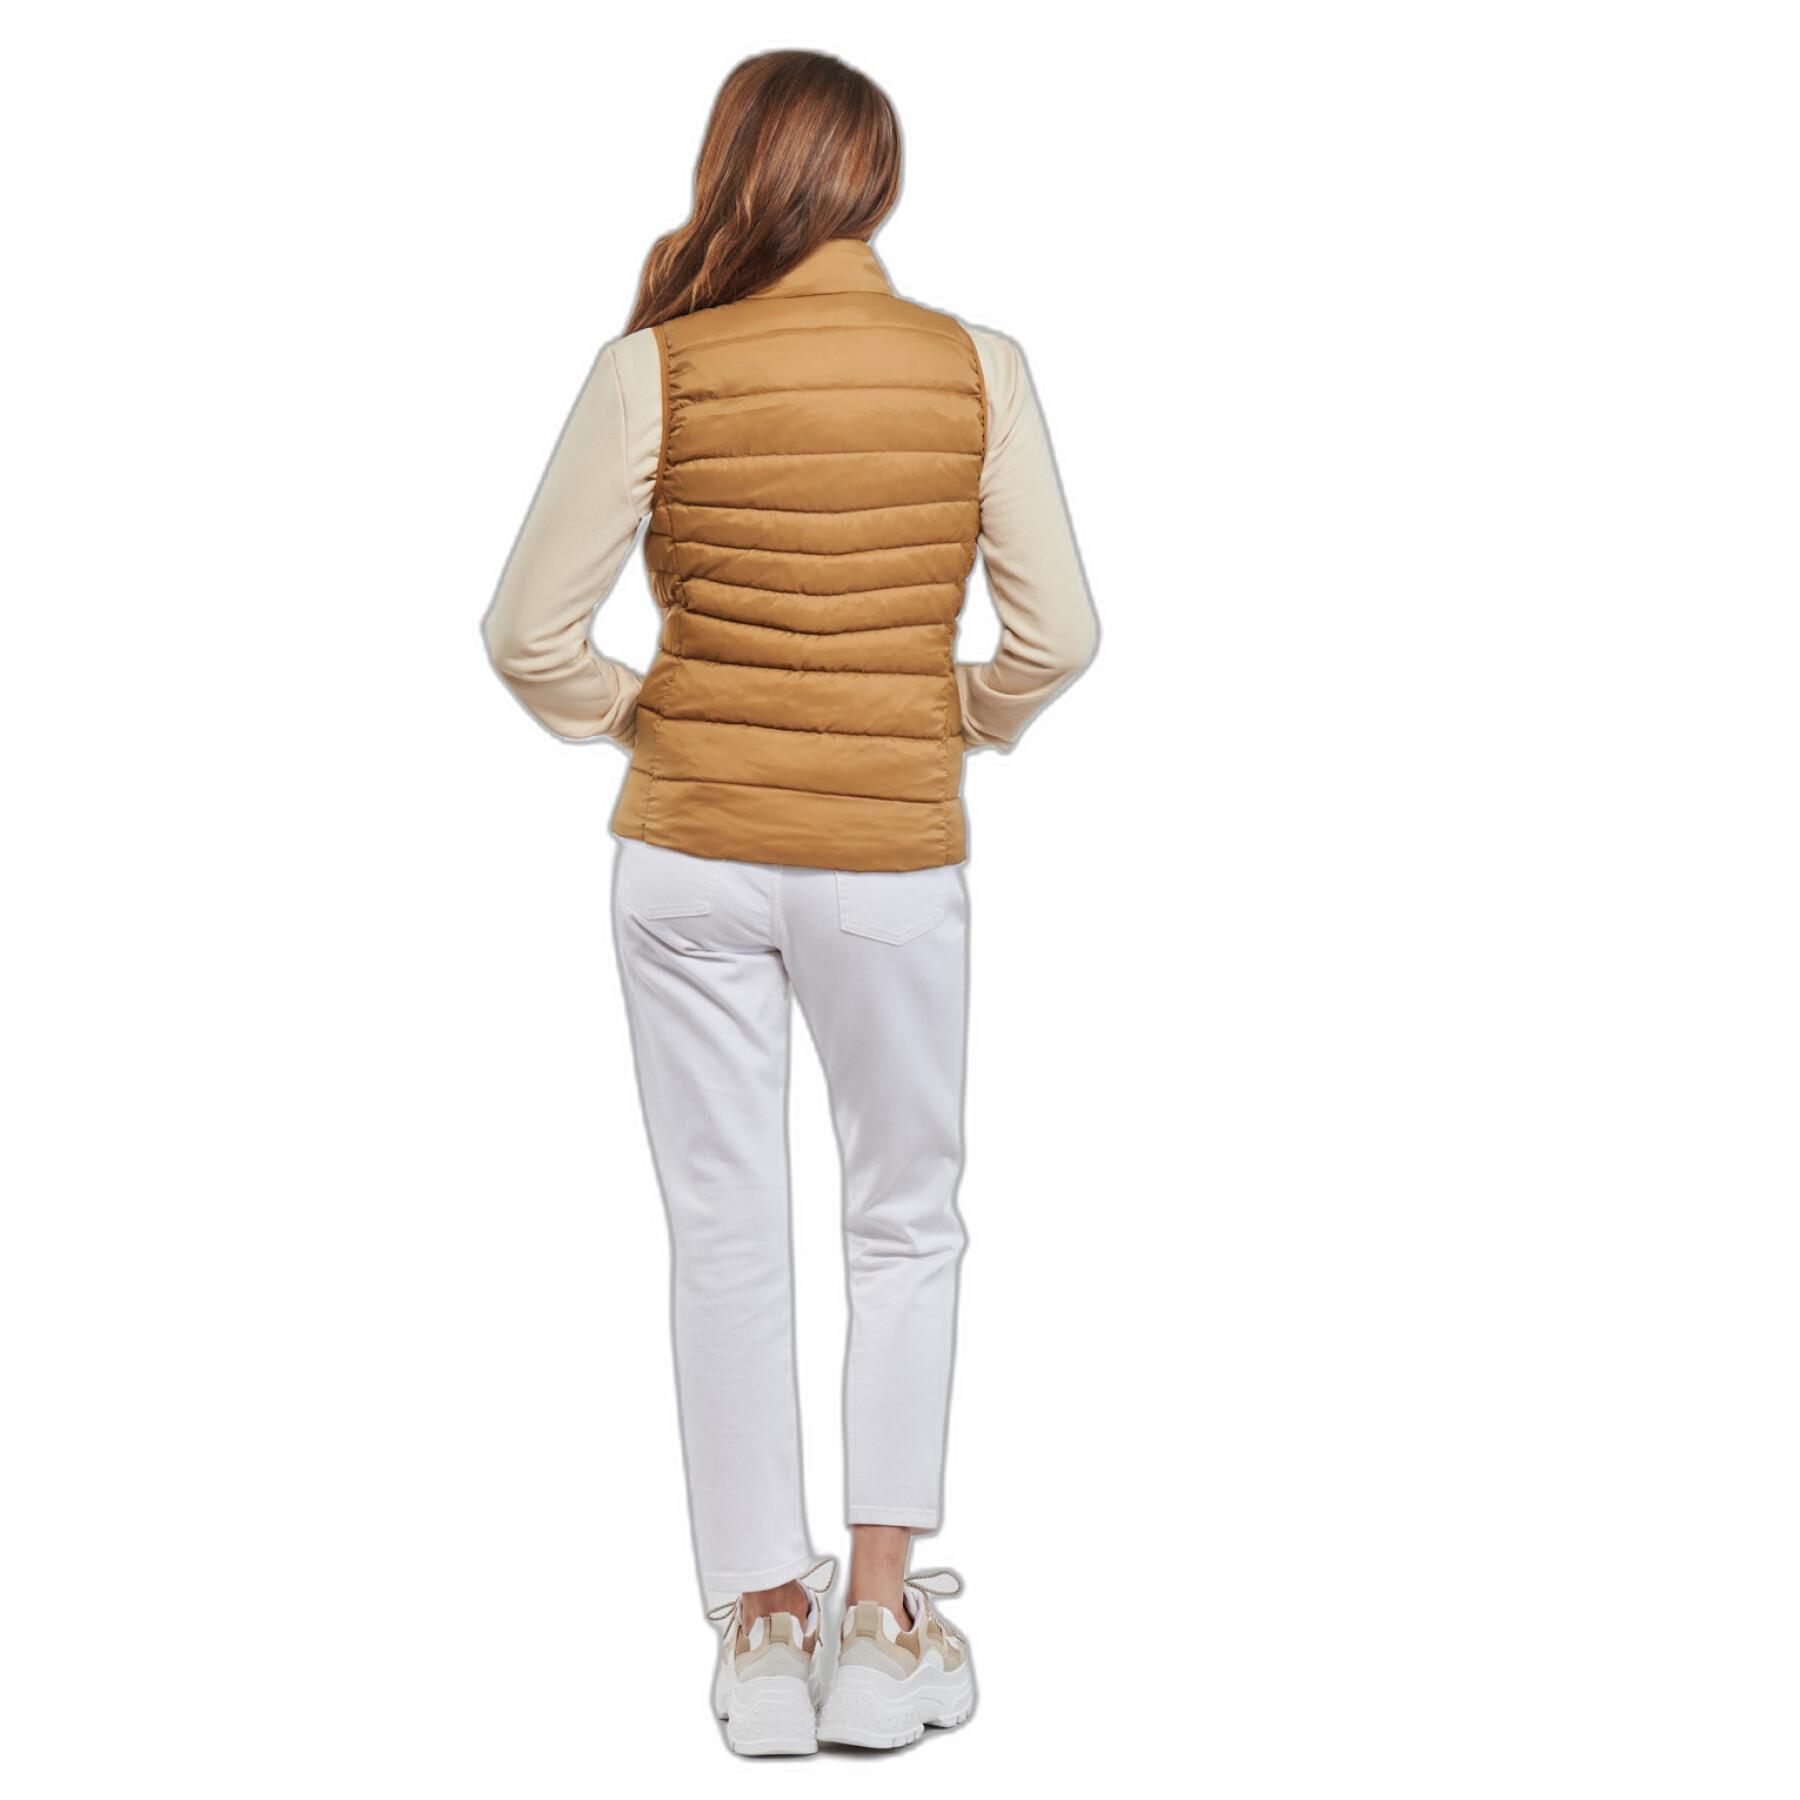 Women's vest Only onlnewclaire quilted